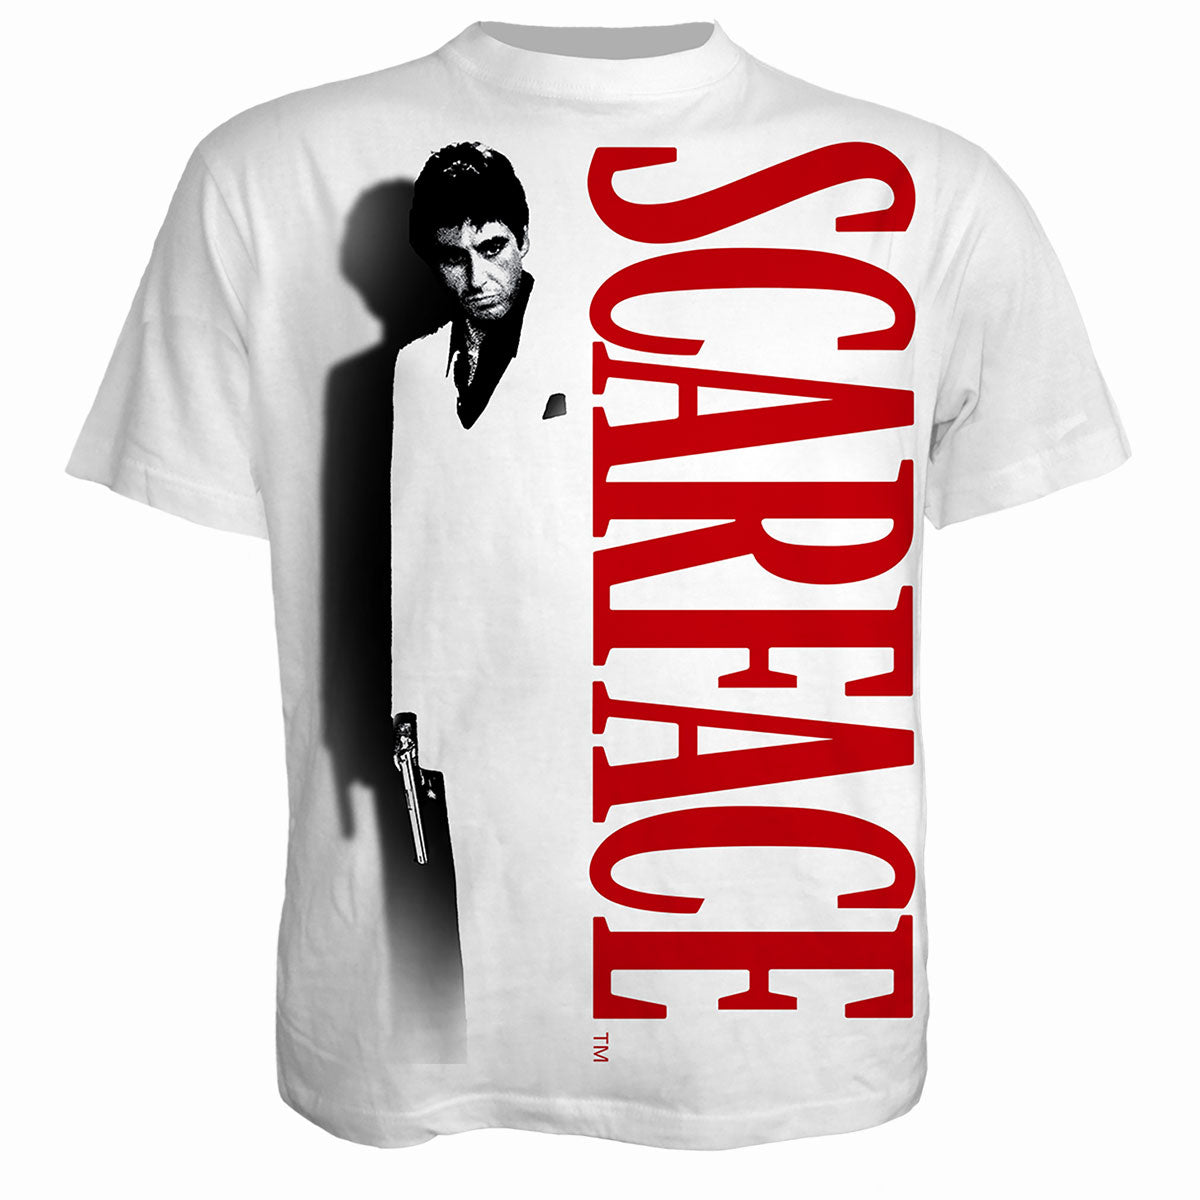 SCARFACE - SHADOW - T-Shirt White